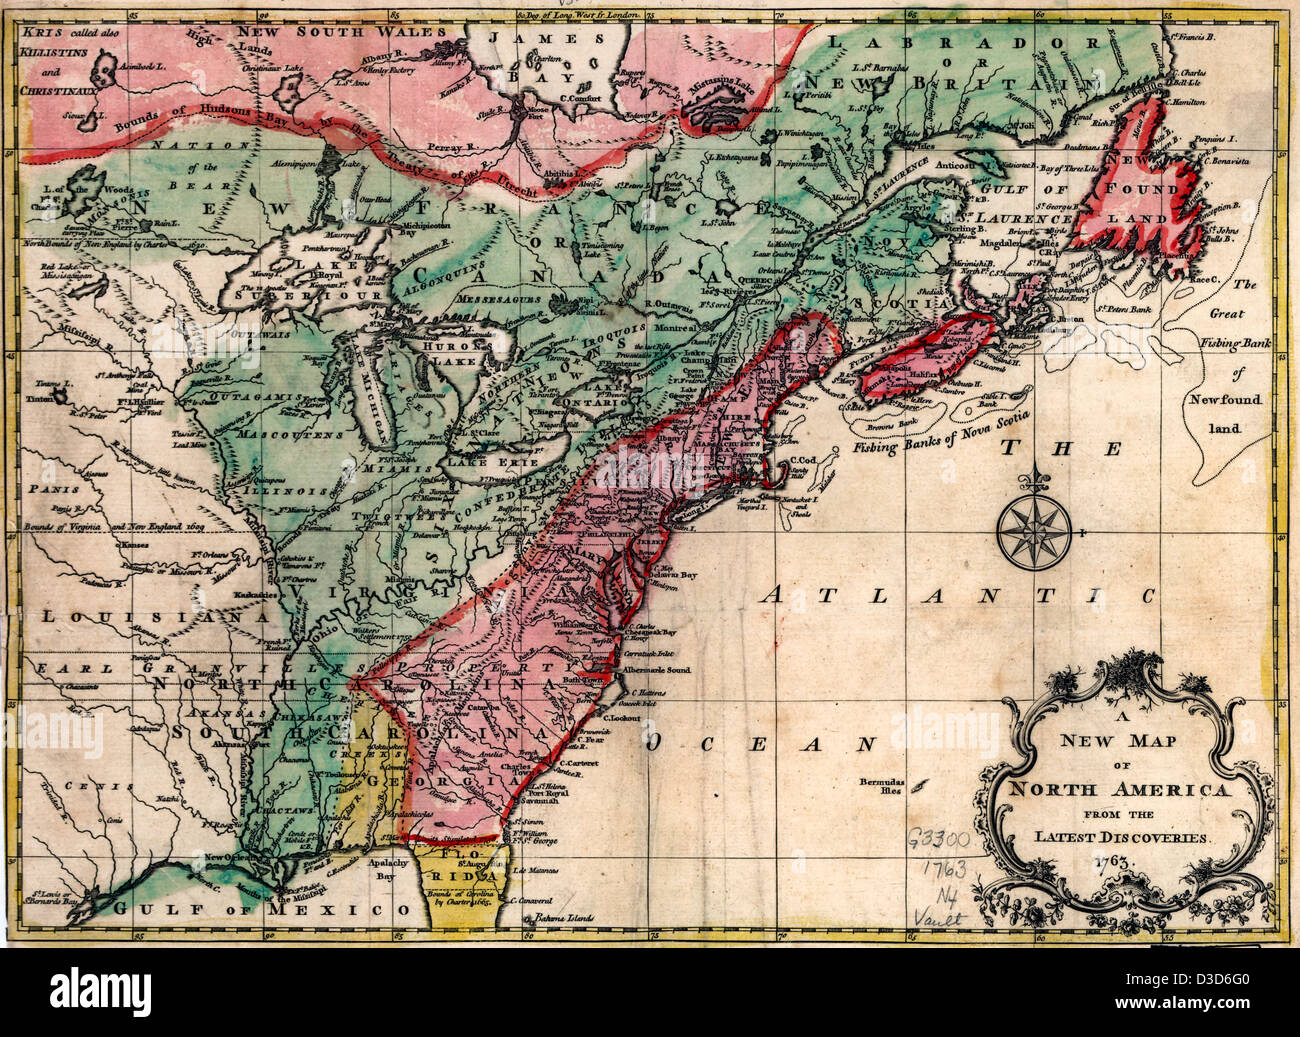 A New map of North America from the latest discoveries. 1763 Stock Photo